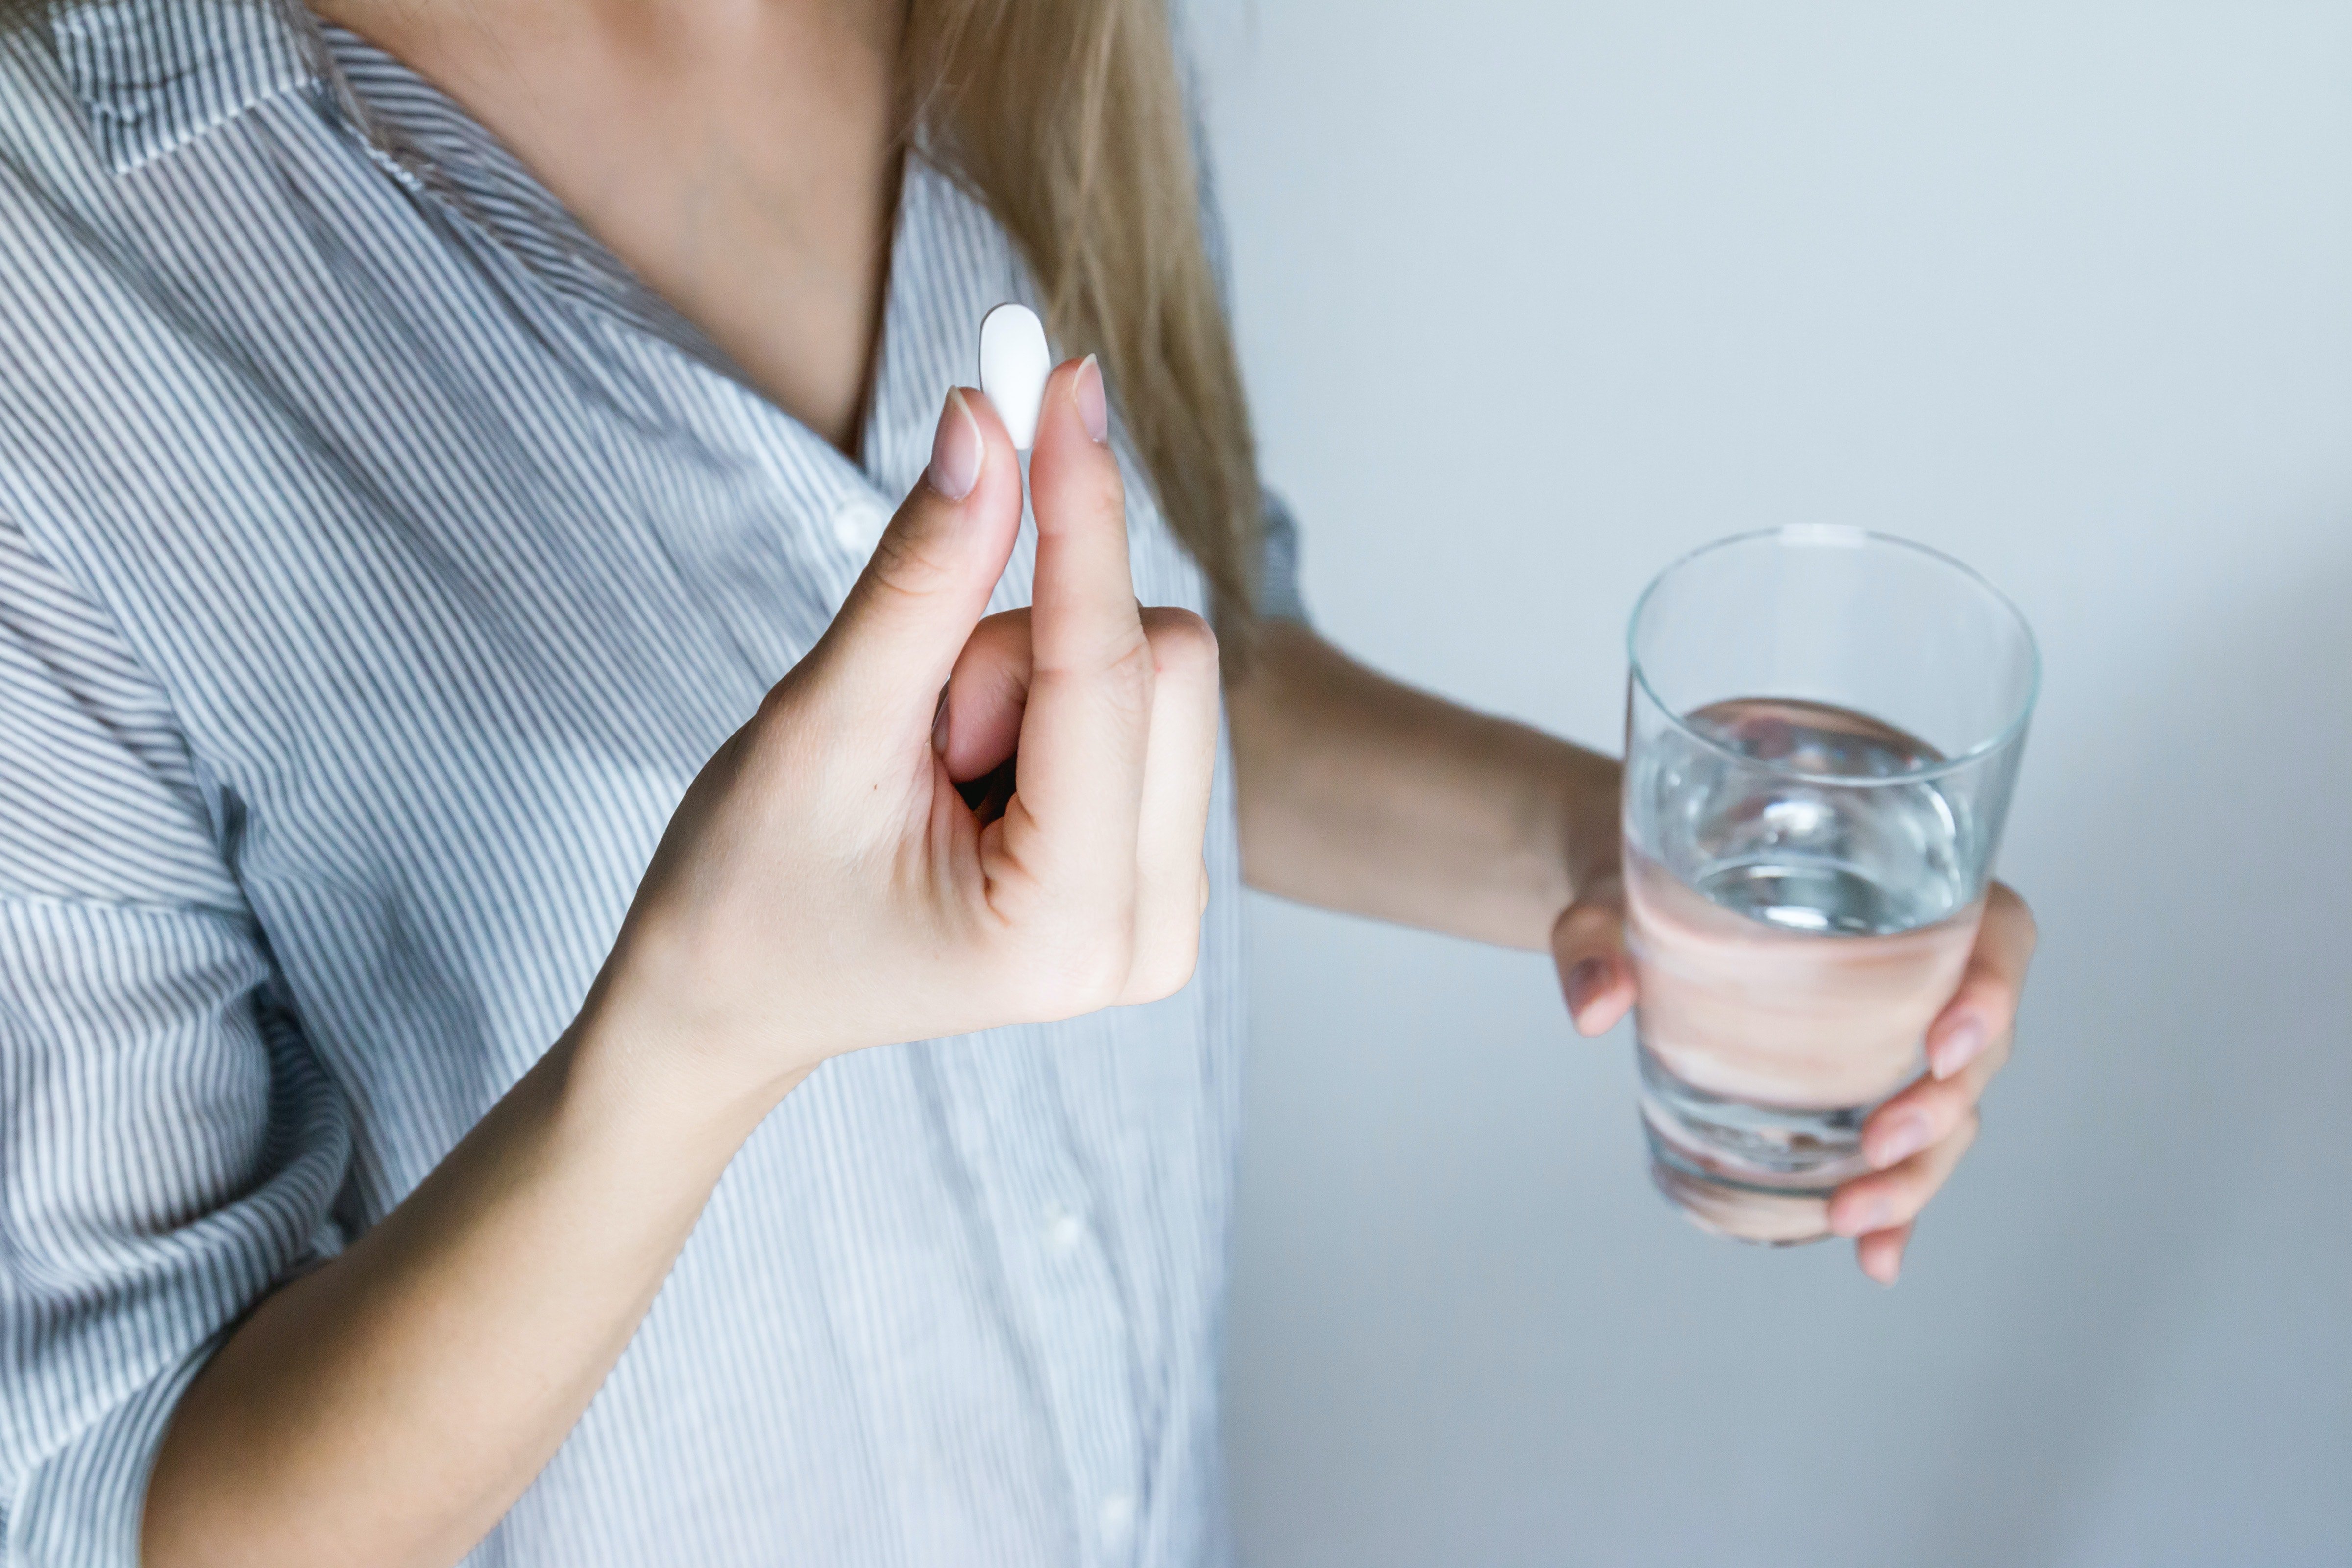 My mom was giving me the wrong medication all this while | Photo: Pexels